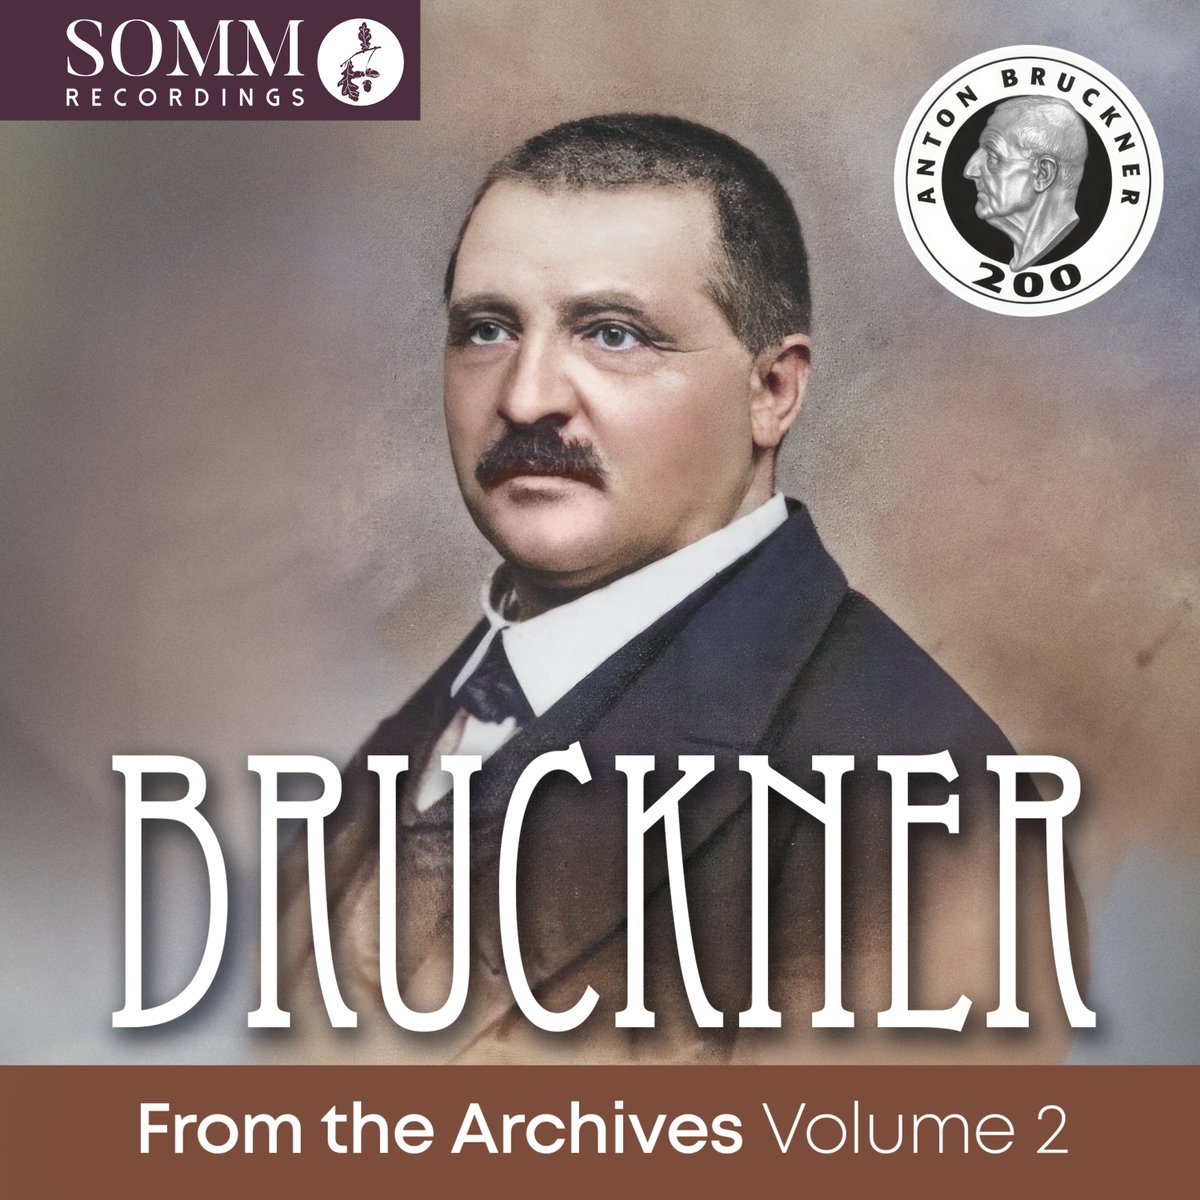 Announcing the 17 May release of the second instalment in Bruckner from the Archives, “a major commemorative series” (@ConcertoNet) in six double-CD volumes celebrating the 200th anniversary of Anton Bruckner’s birth in 1824! Available for pre-order now at somm-recordings.com